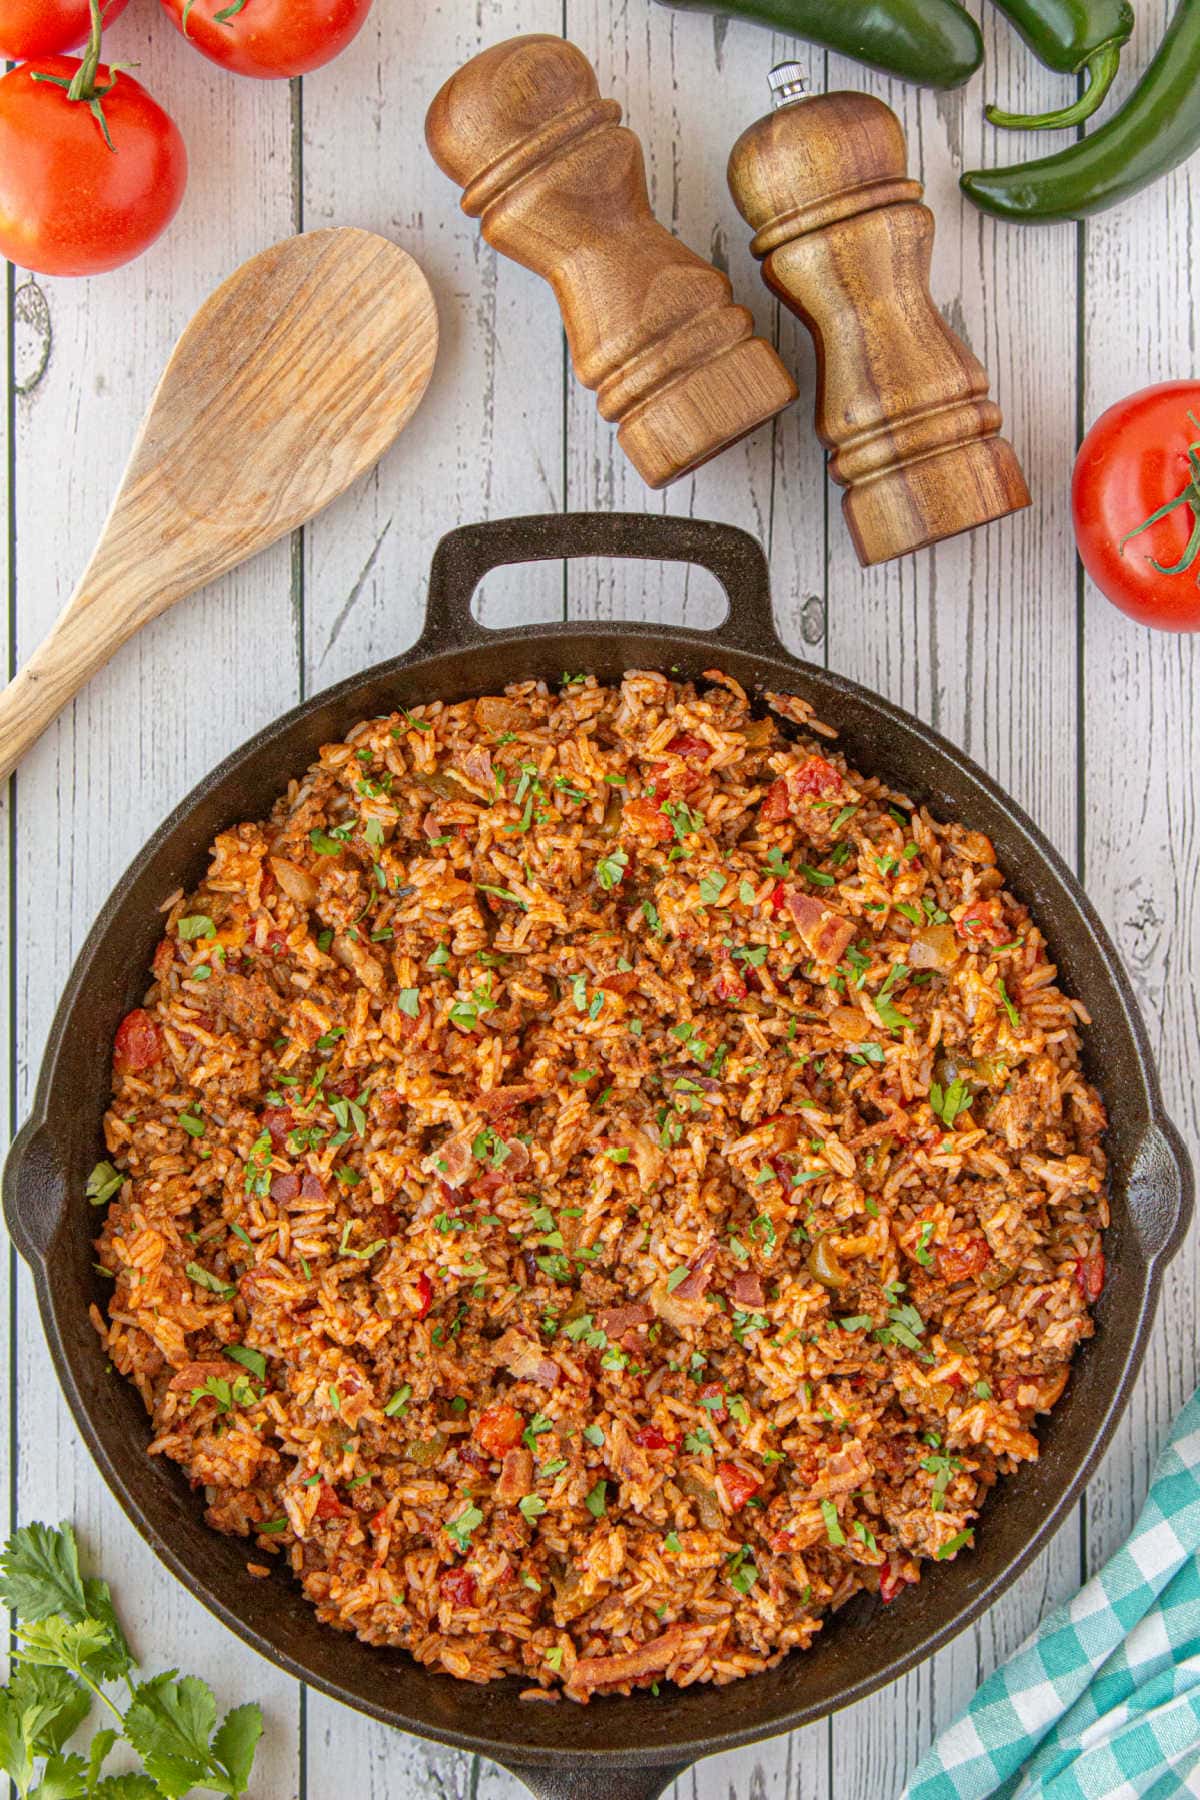 Overhead view of Spanish rice in an. iron skillet.